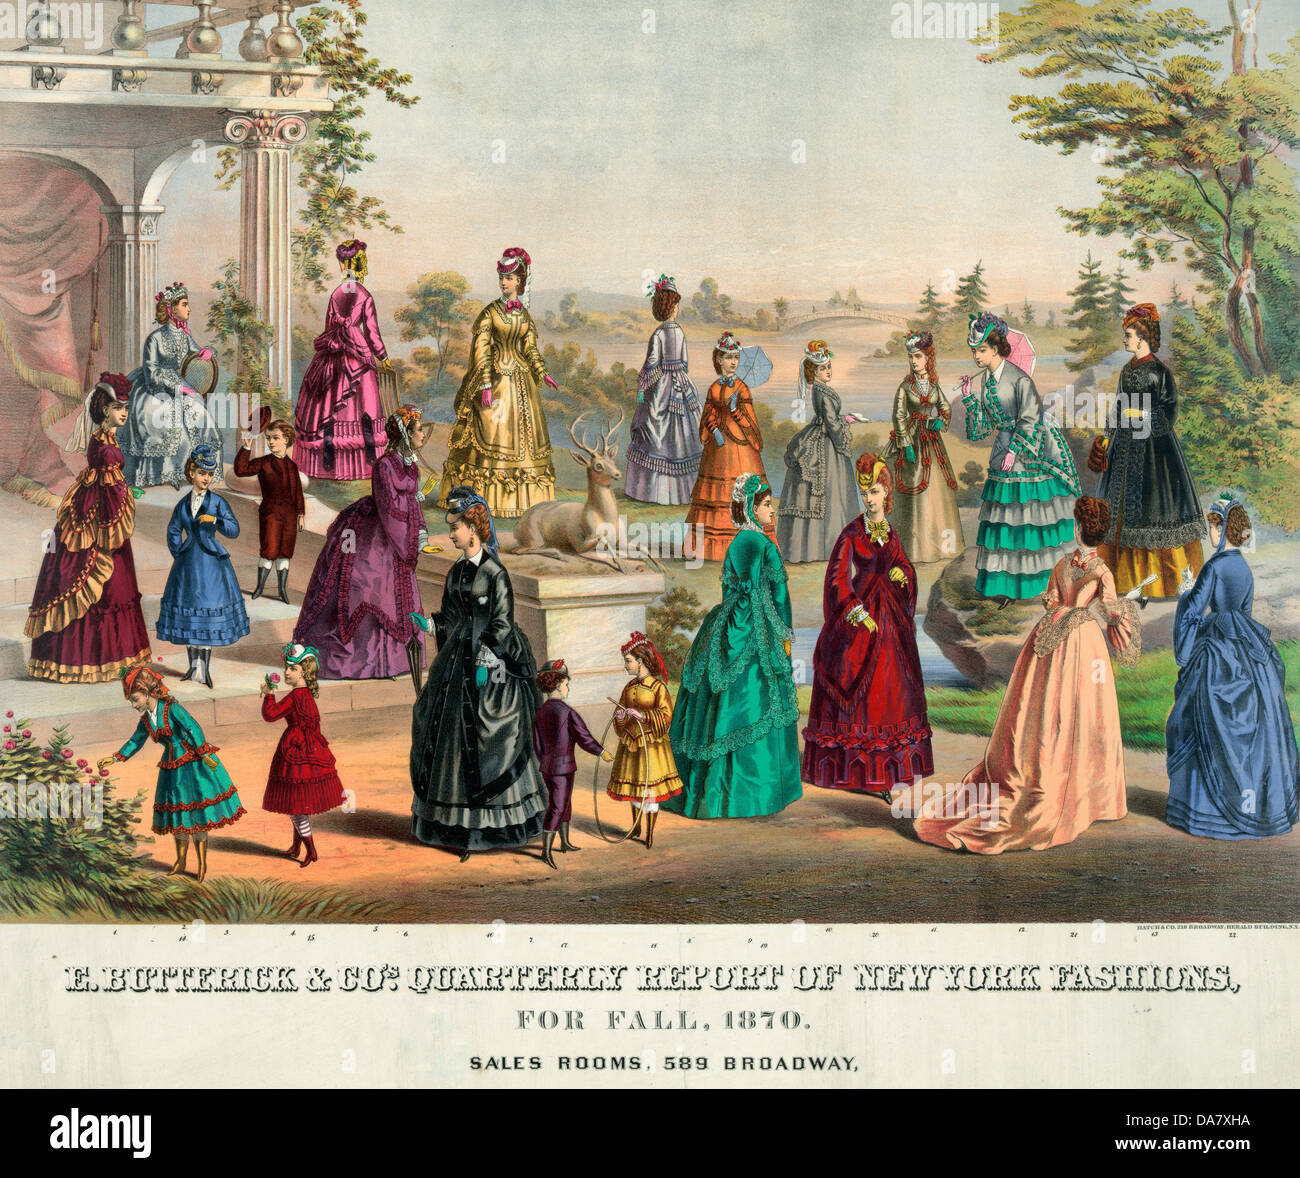 E. Butterick & Co.'s quarterly report of New York fashions, for fall, 1870. Stock Photo